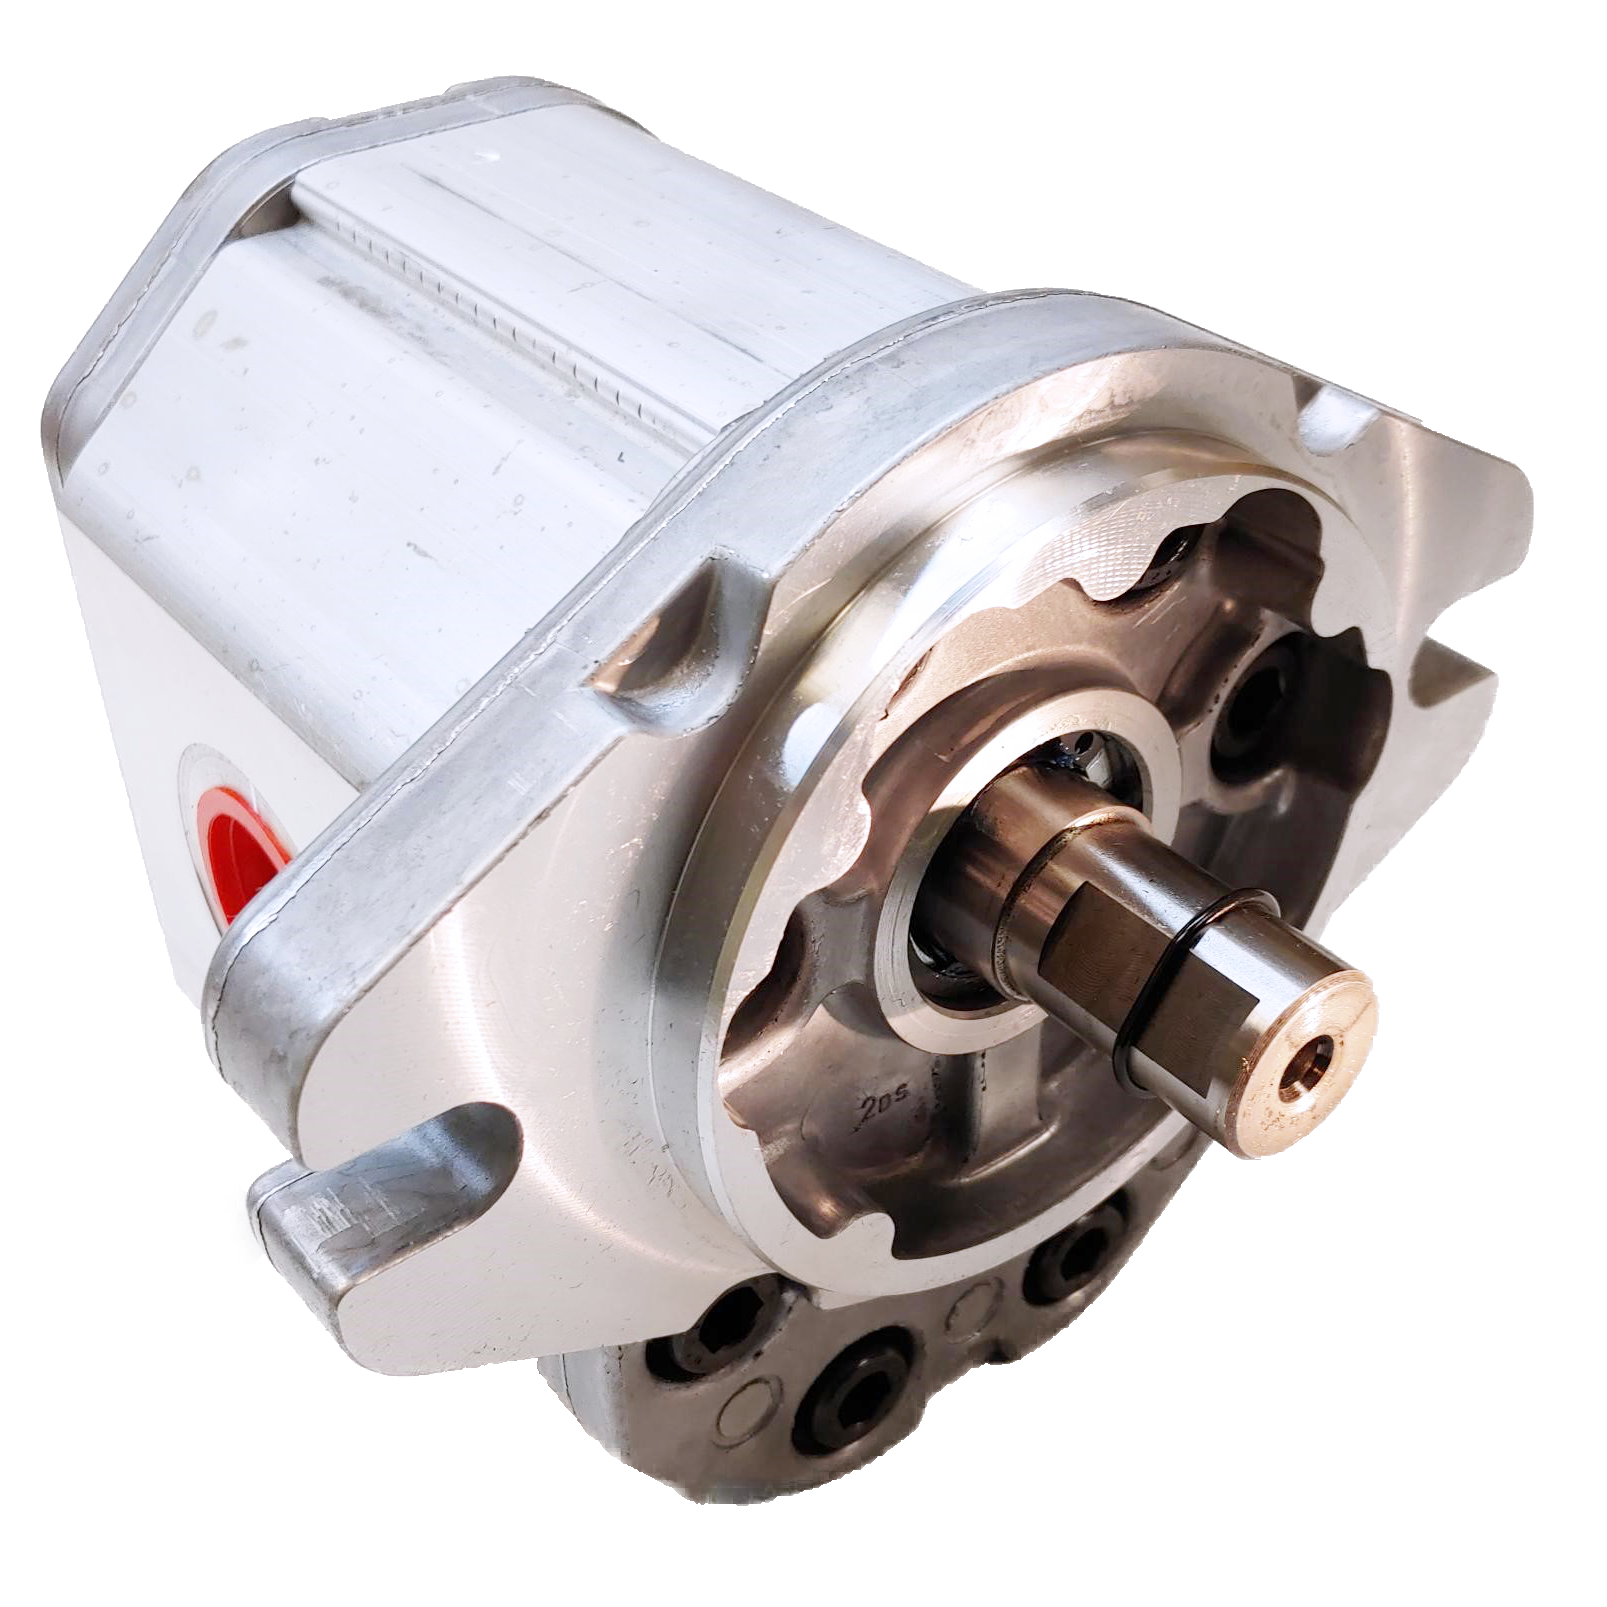 ALM3A-R-50-E4 : Marzocchi Gear Motor, Bidirectional, 33cc, 3335psi rated, 3300RPM, 1" Code 61 ports, 5/8" Bore x 5/32" Keyed Shaft